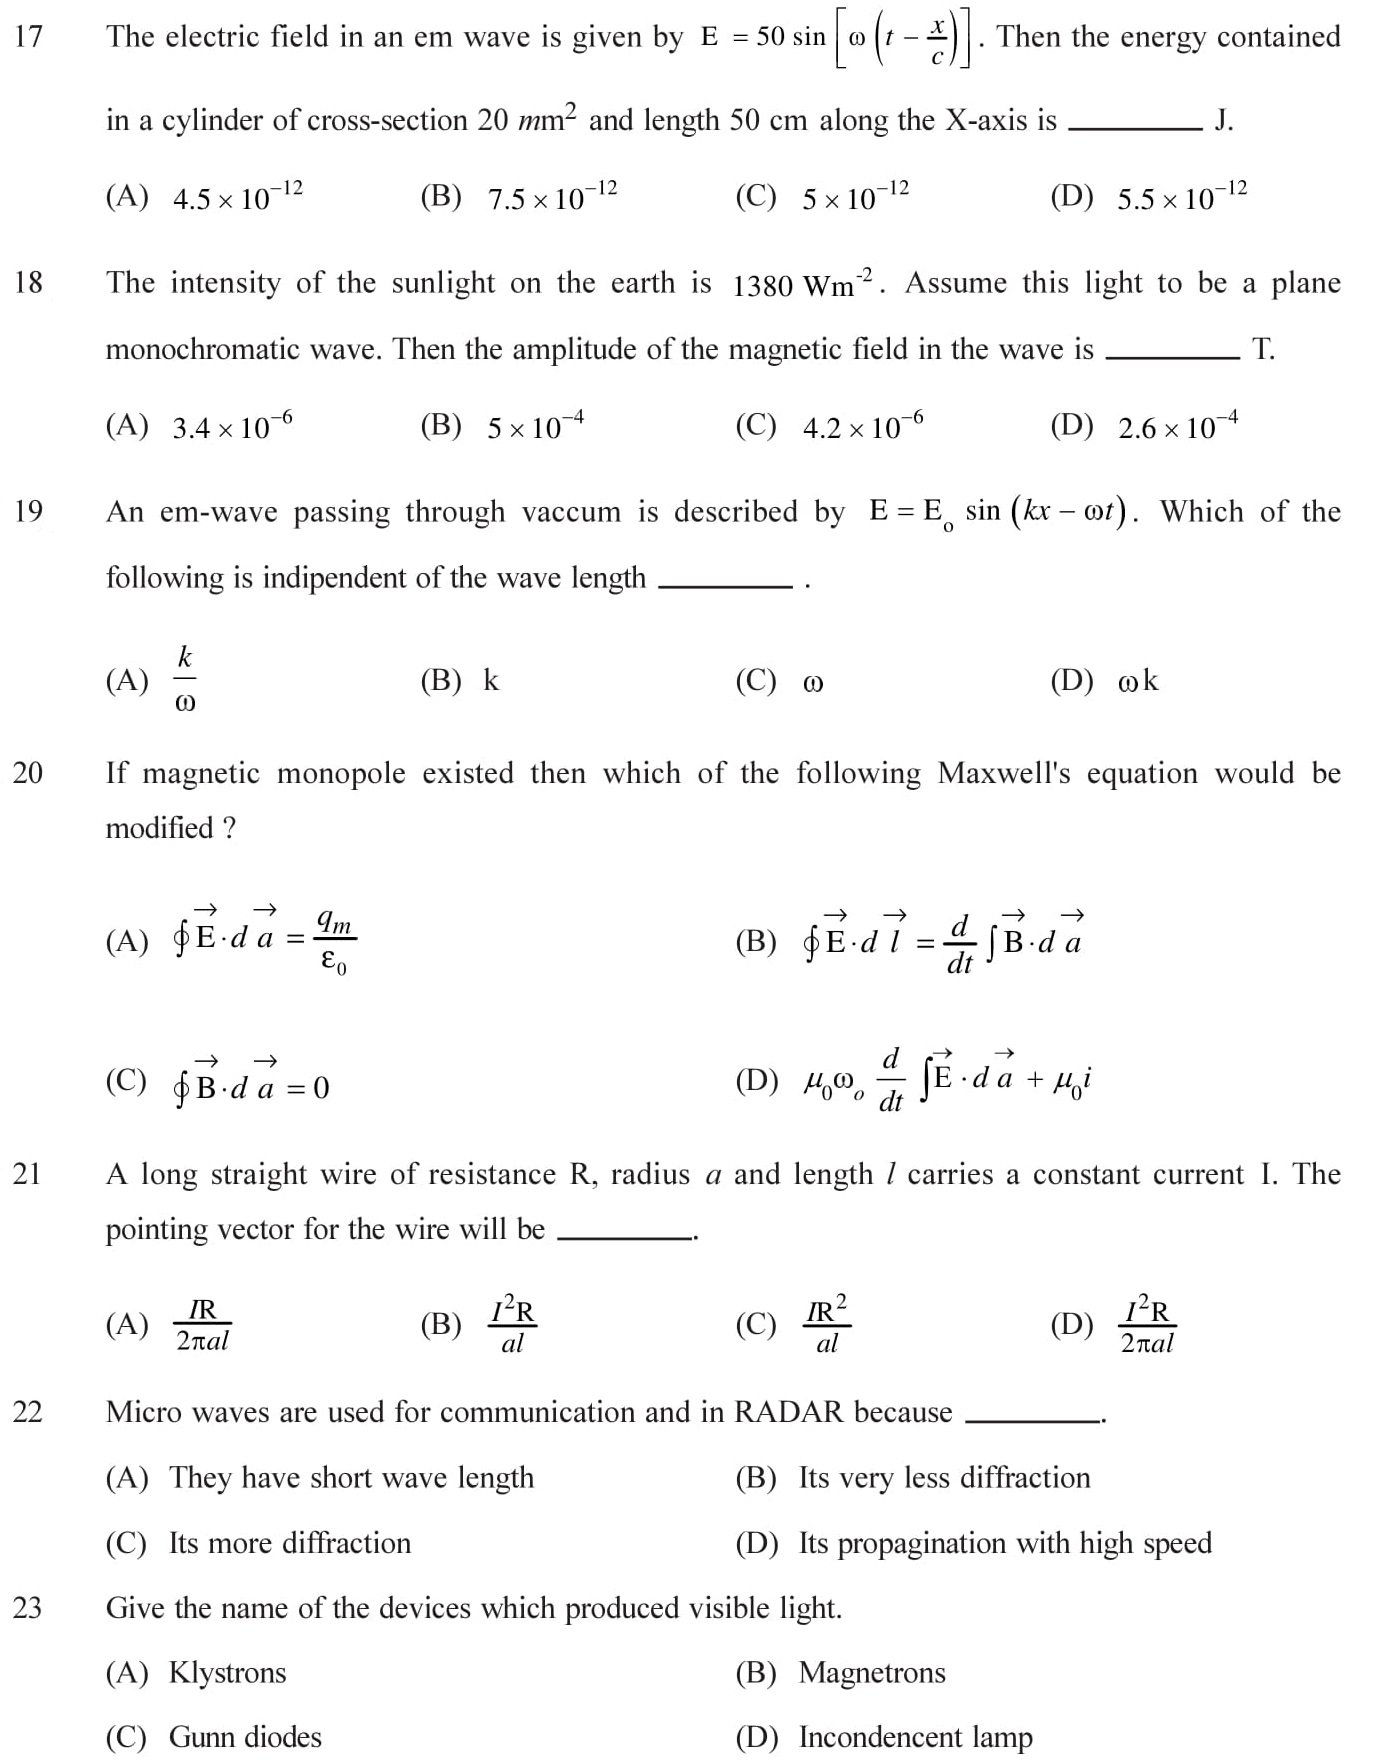 Questions based on Eletromagnetic Waves - EM Waves for Entrance Exams topic 4